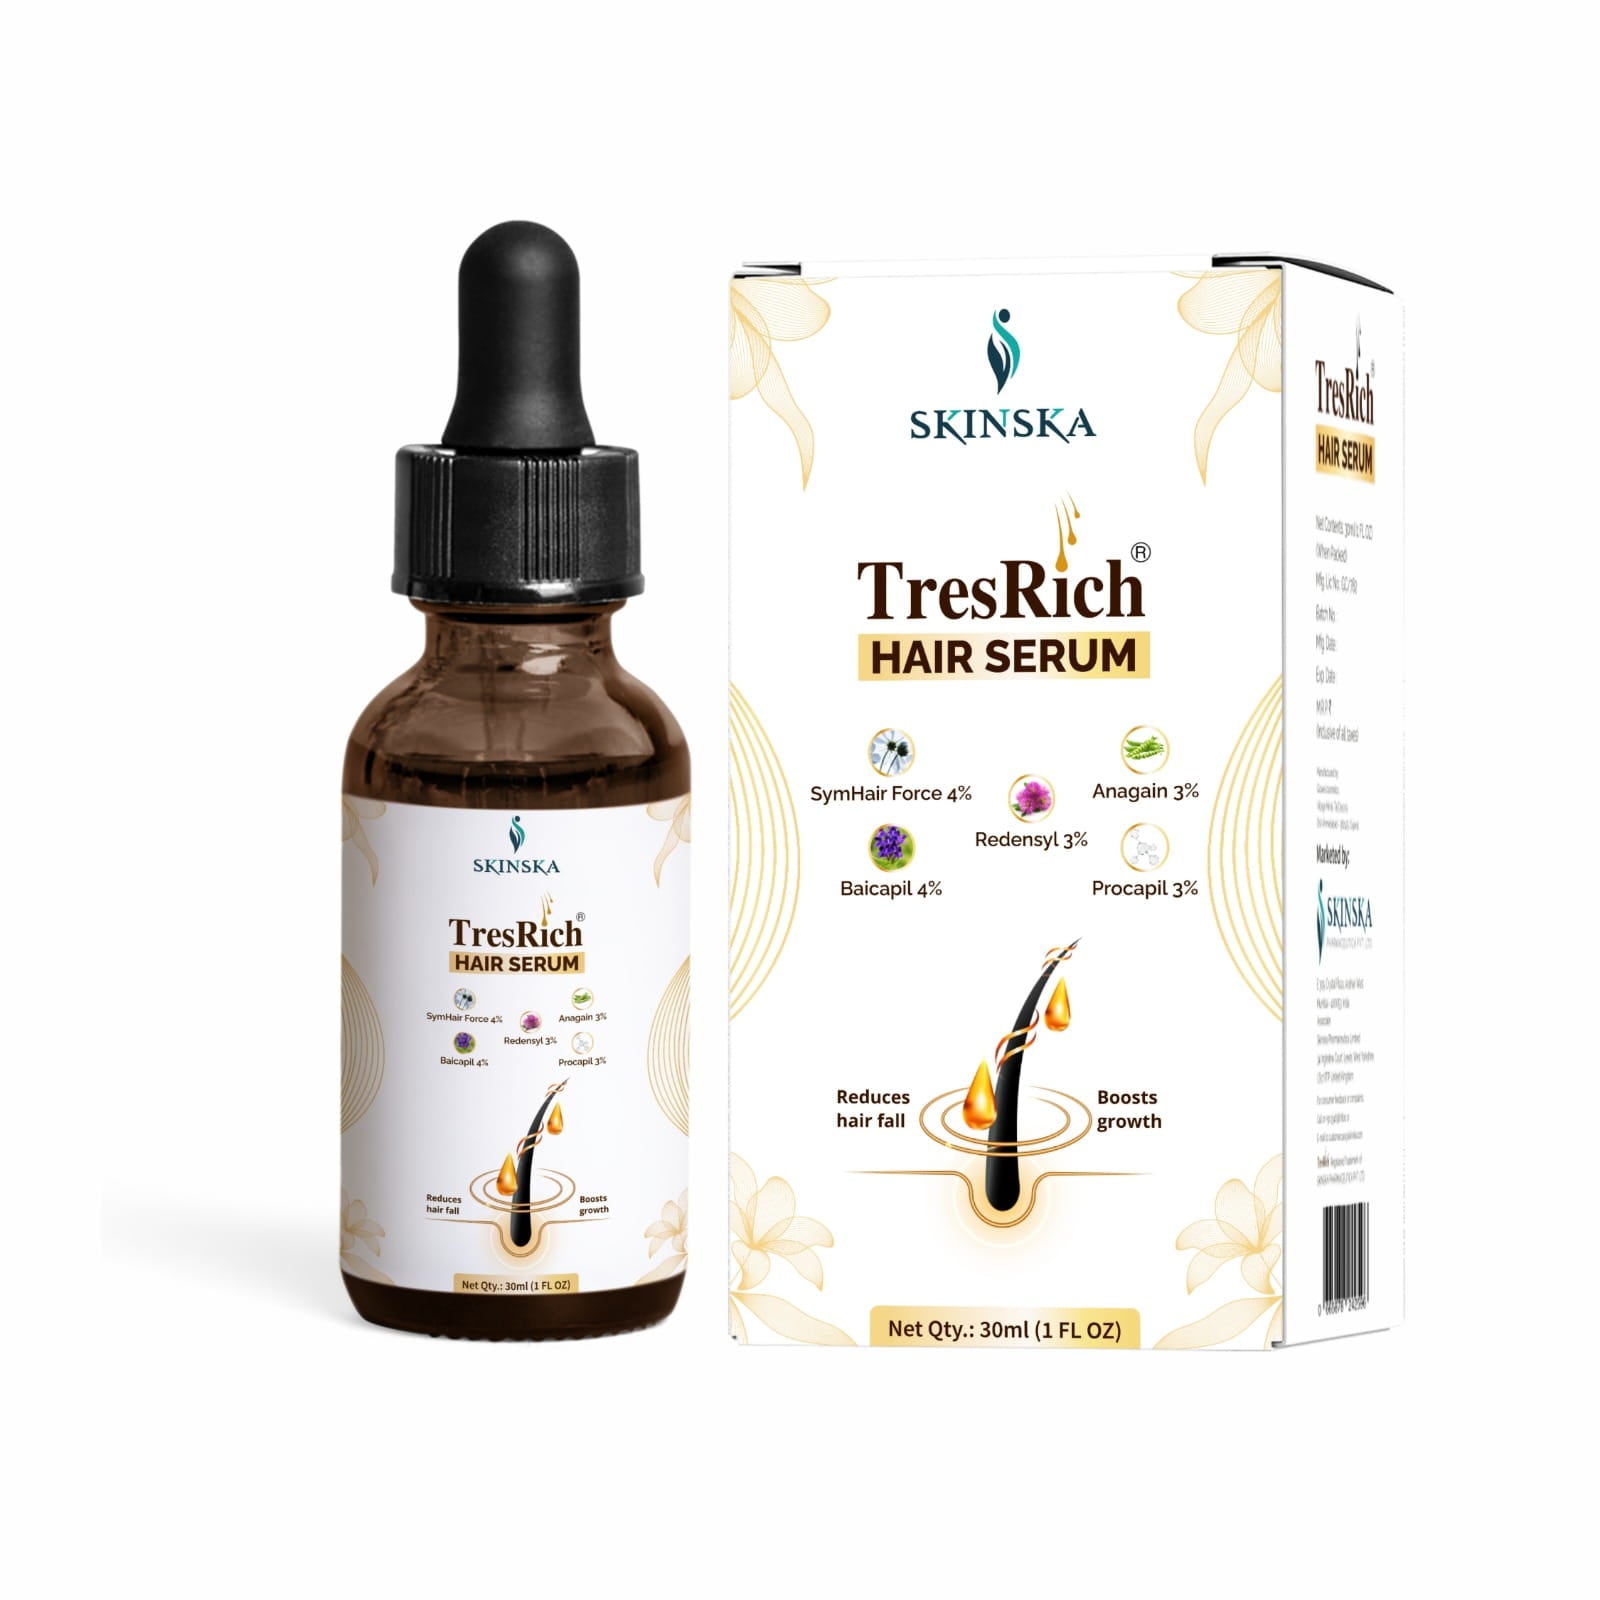 TresRich hair serum with redensyl 3% for hair growth Also contains anagain 3%, procapil 3%, baicapil 4% and symhair force 4% for hair growth